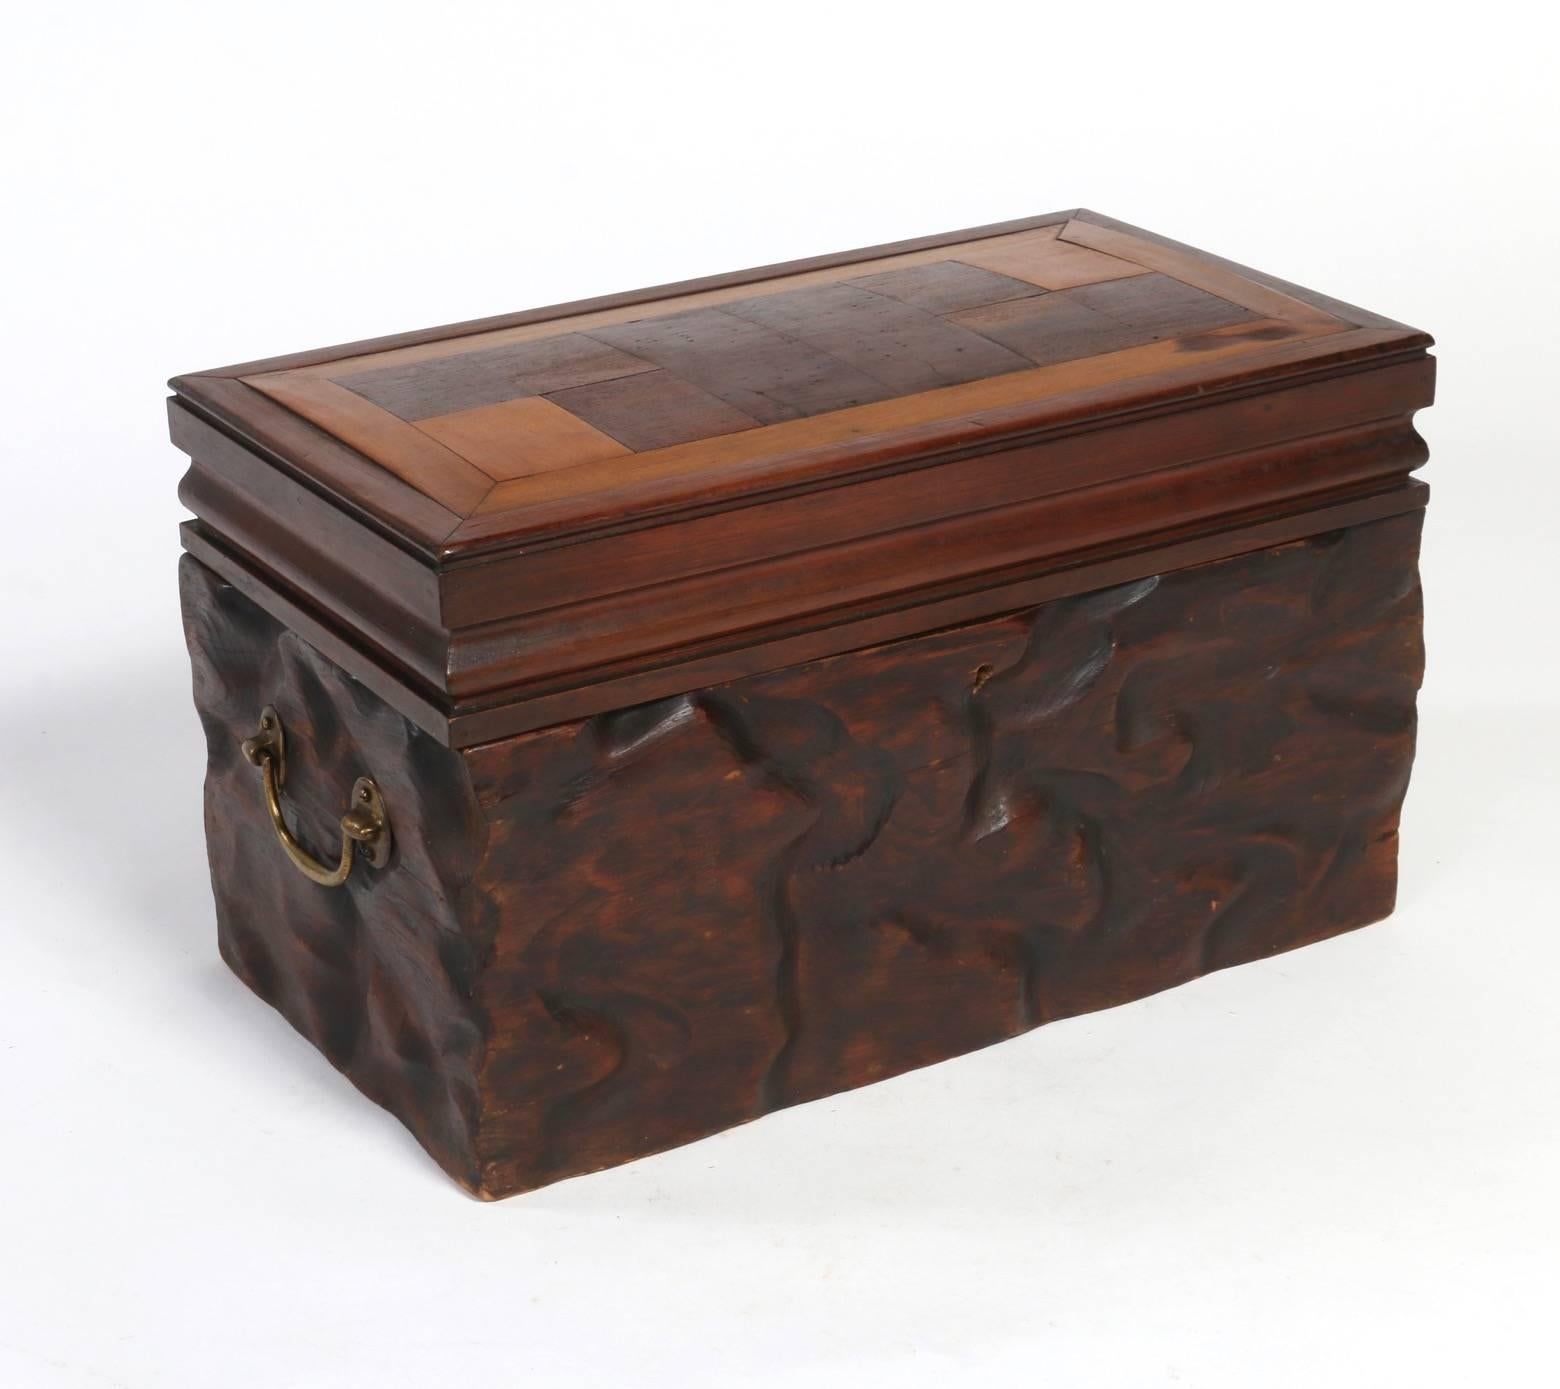 Creatively made box of mixed wood species, accented on bottom with organic hewn natural bark, made circa 1890. The execution of the top exhibits the cabinet makers skills in precision woodworking and deftness in marquetry. The removable interior